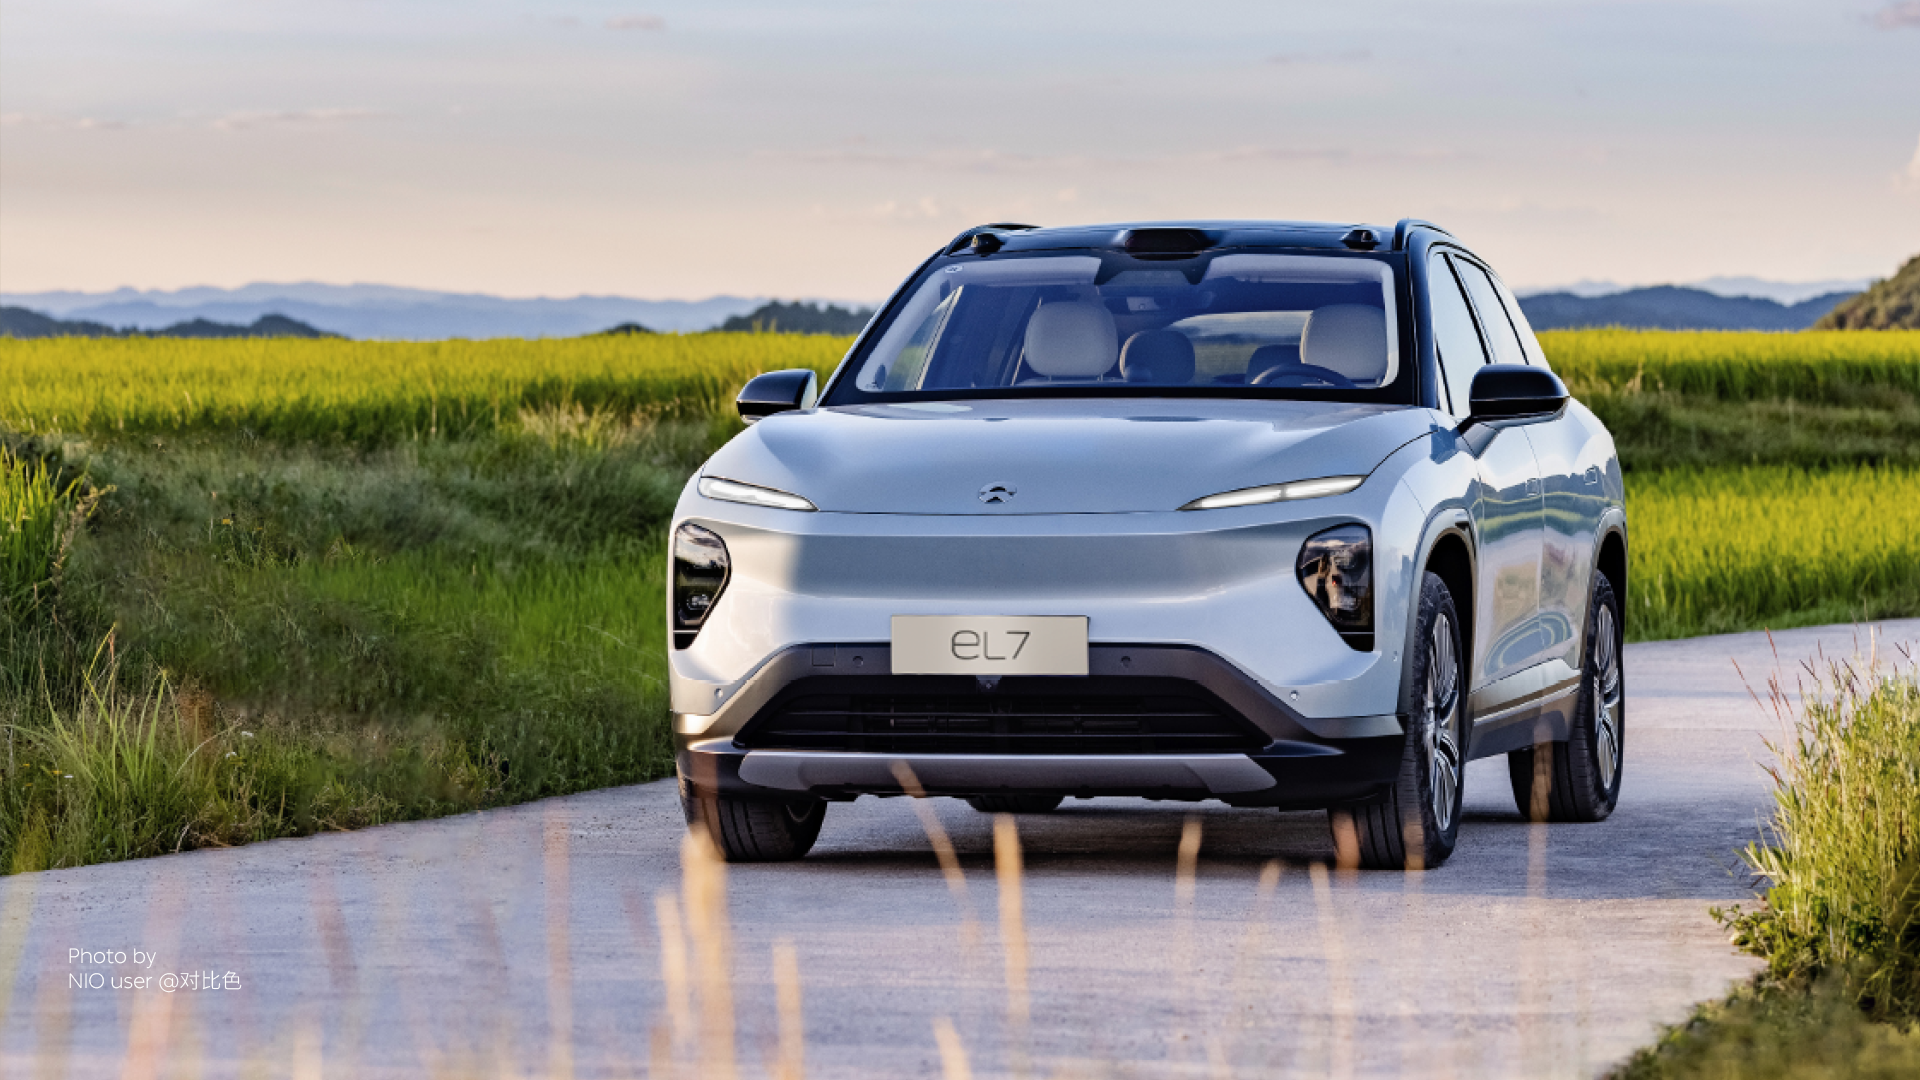 NIO Inc. Provides January 2023 Delivery Update